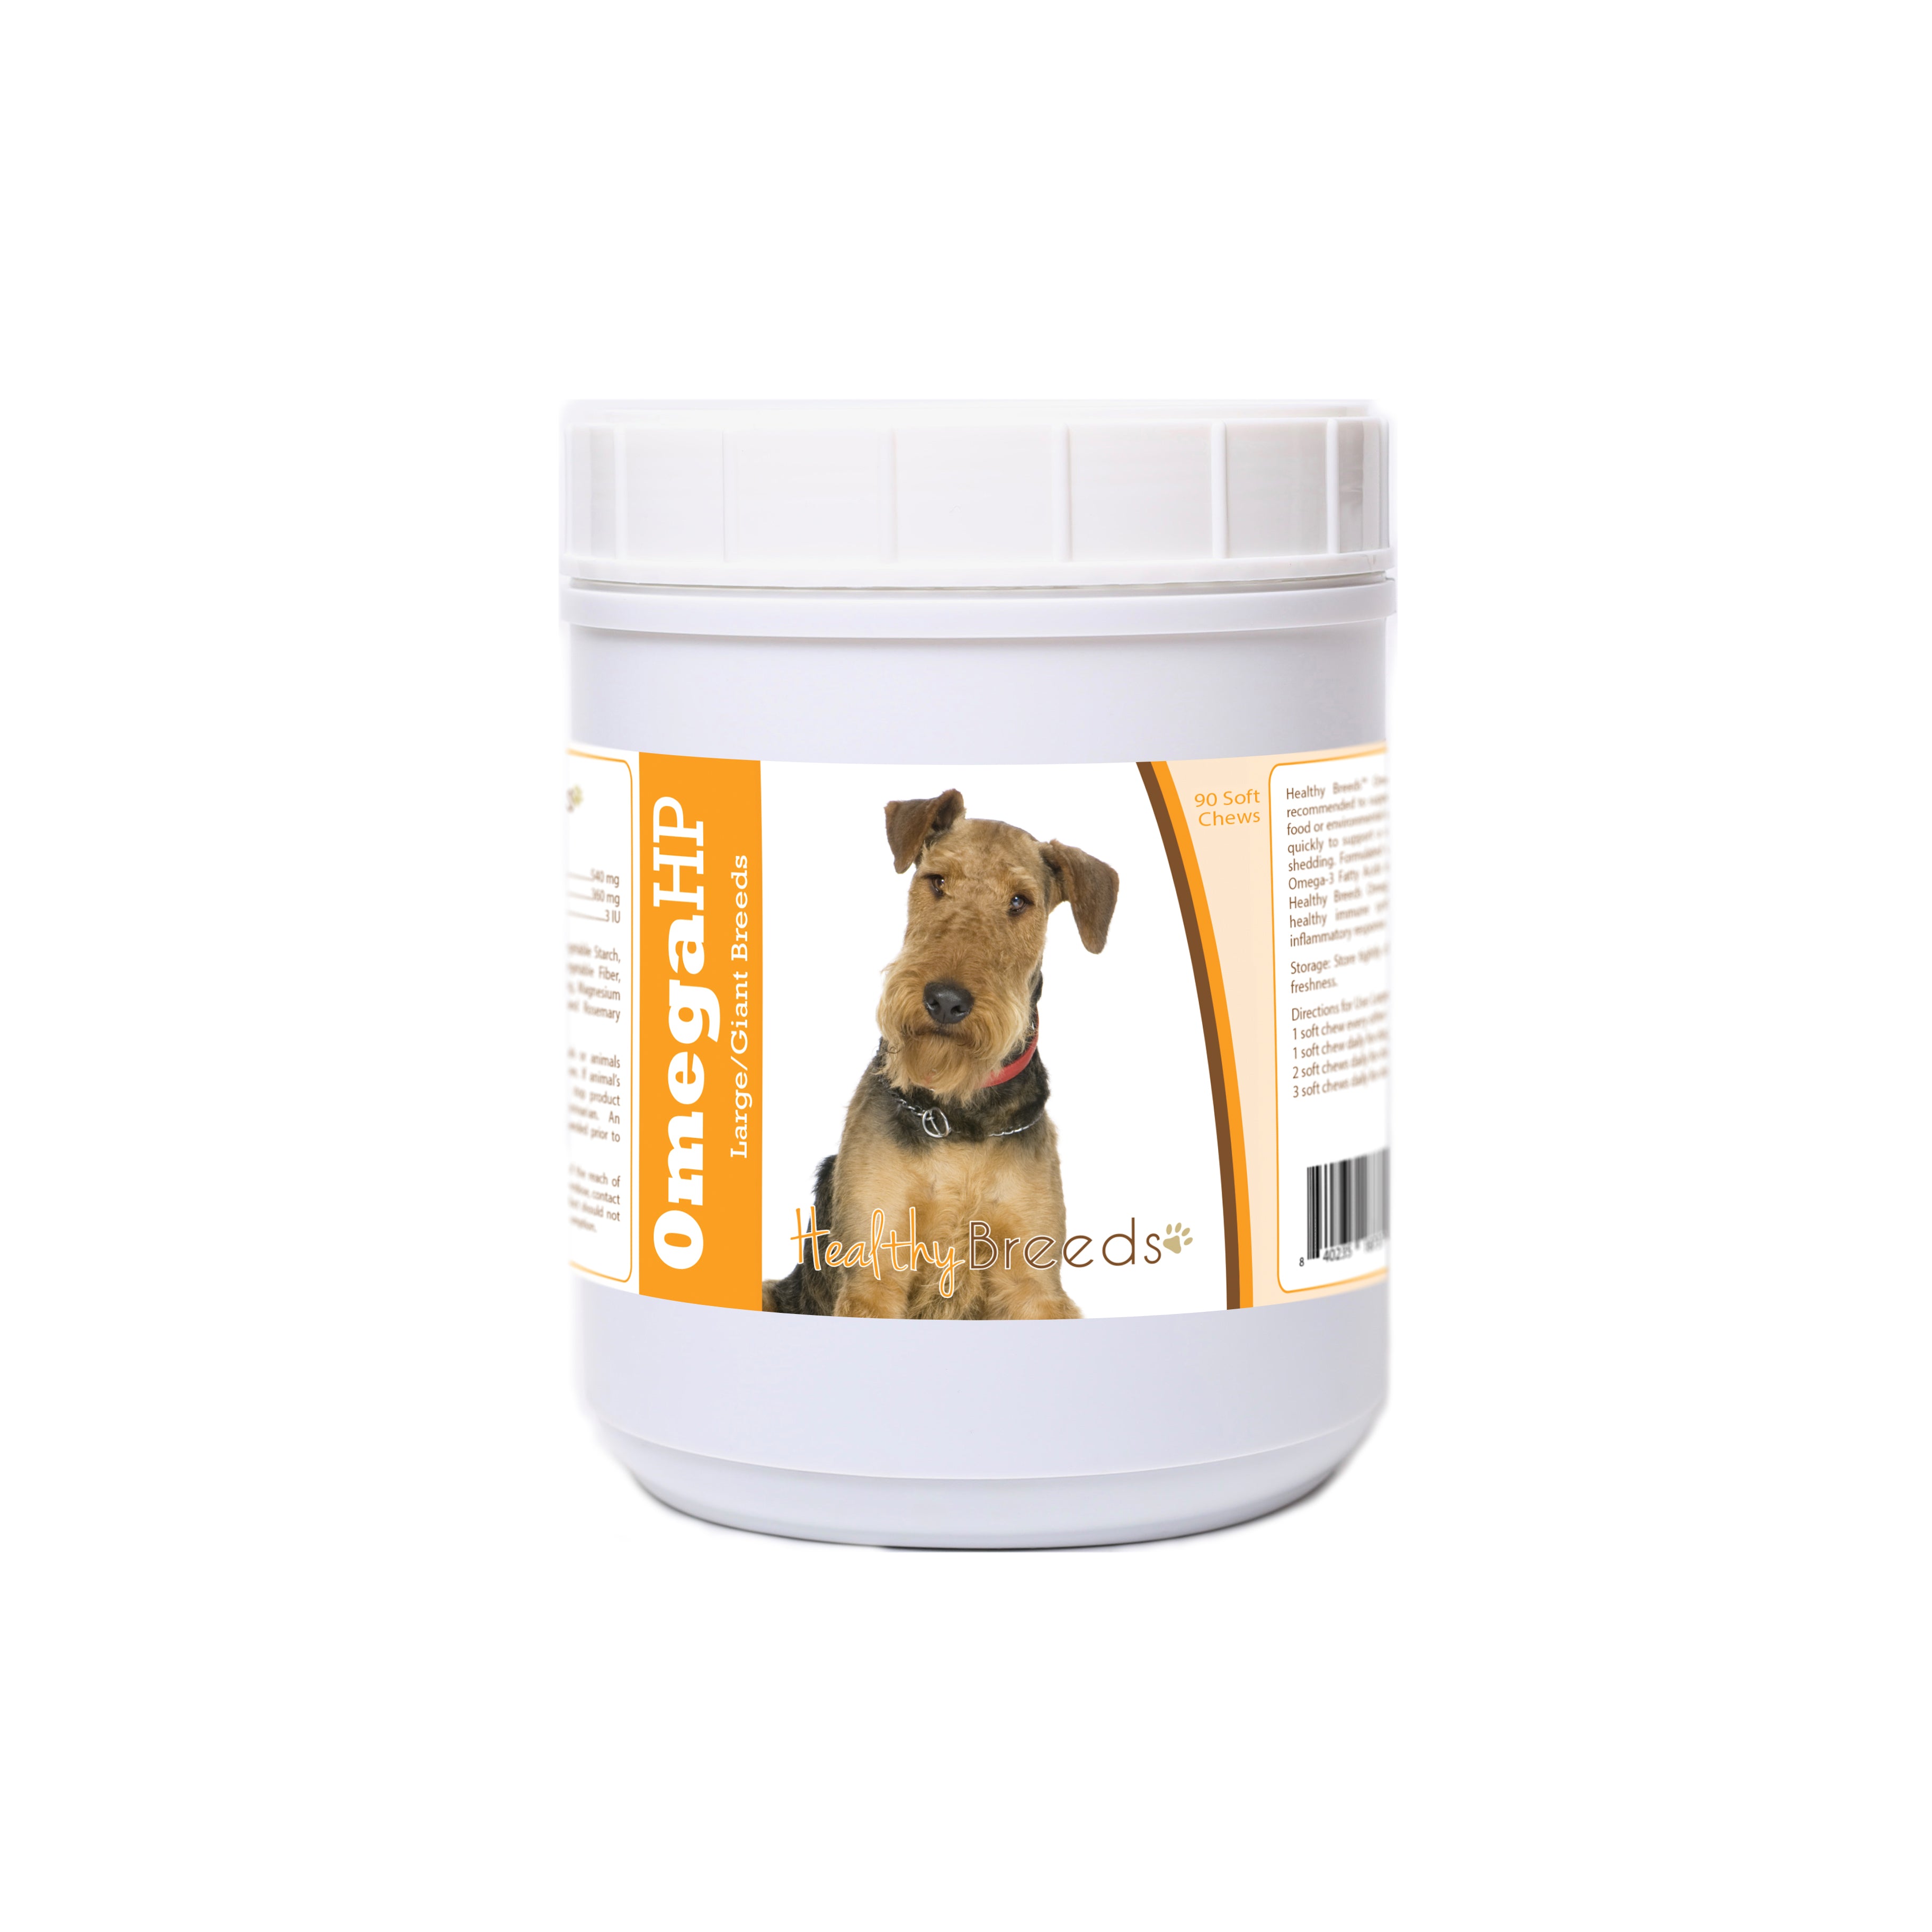 Airedale Terrier Omega HP Fatty Acid Skin and Coat Support Soft Chews 90 Count